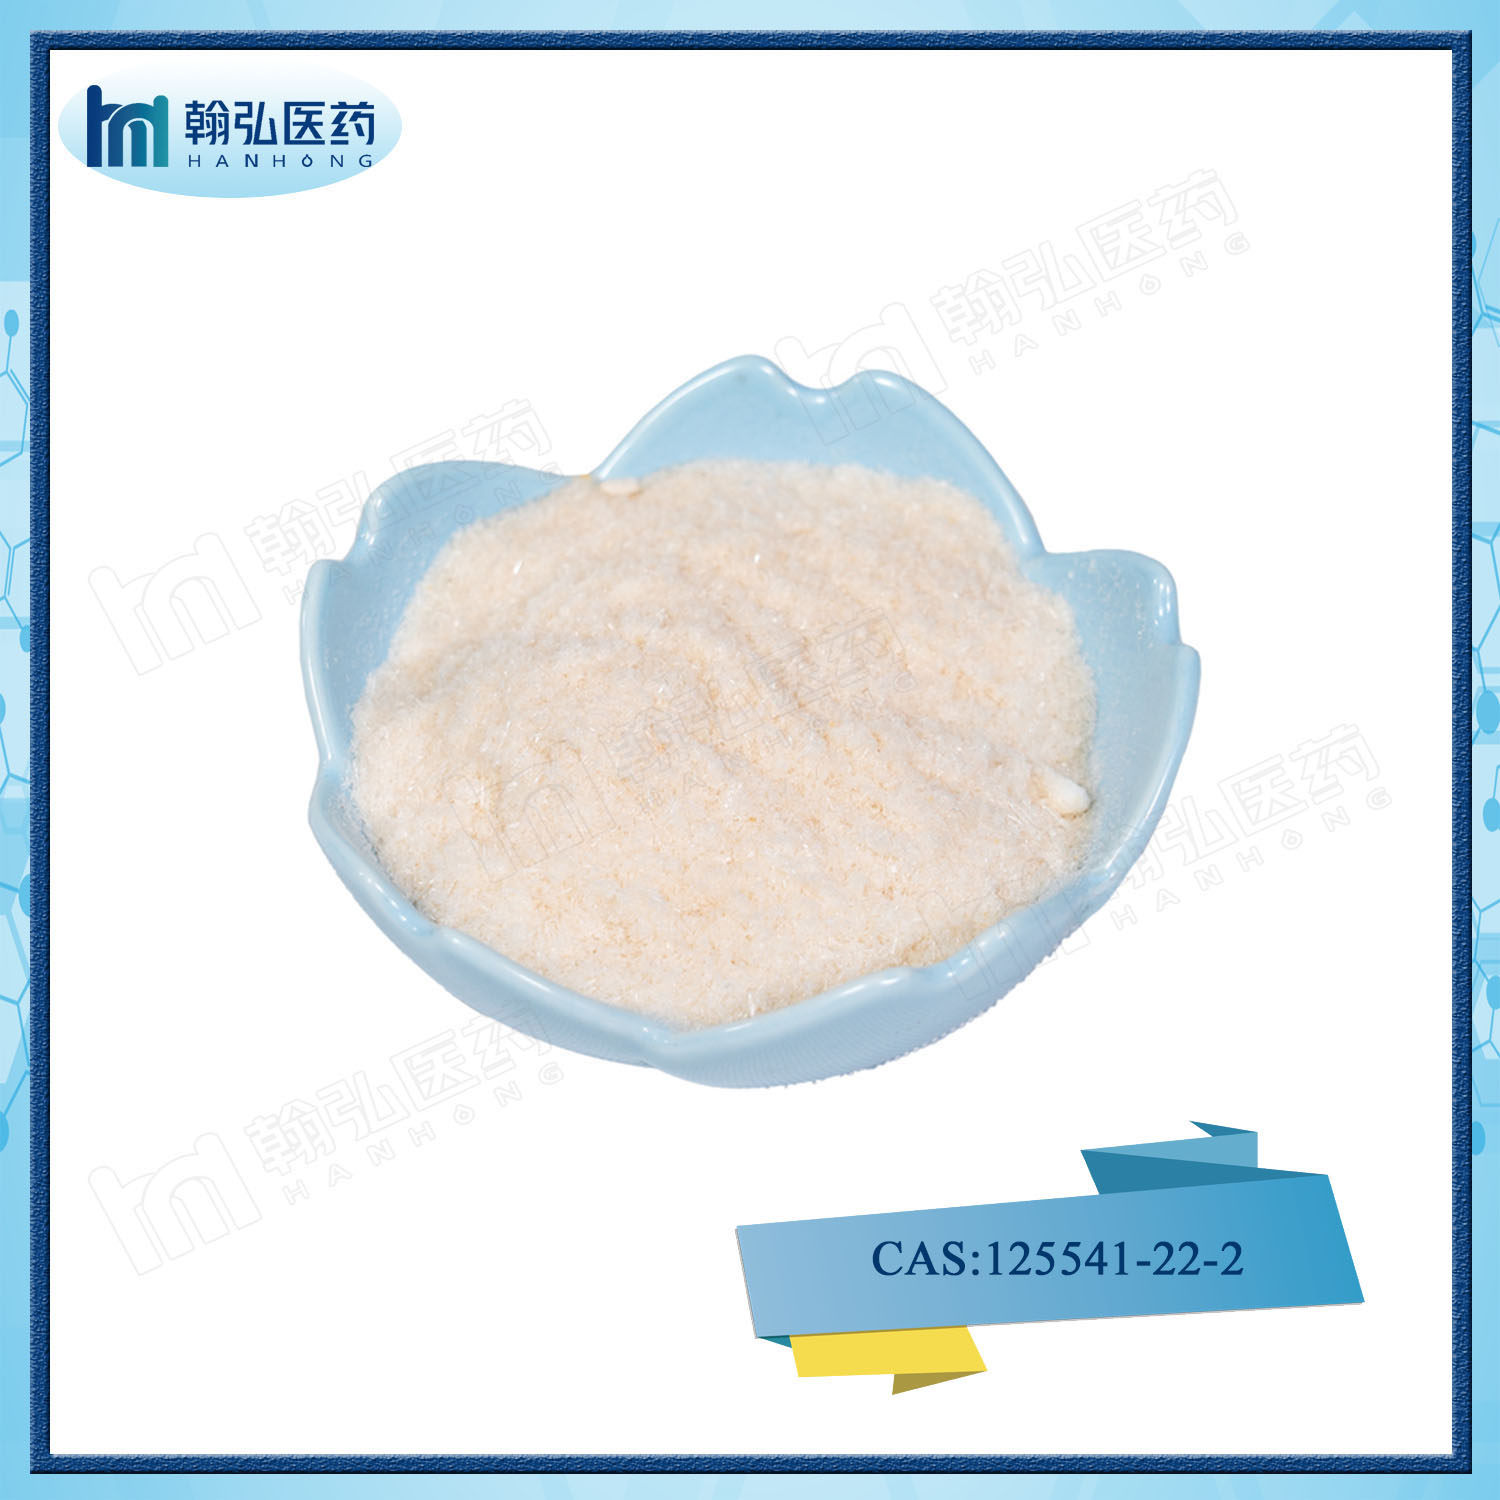 Factory Supply Chemicals 1-N-Boc-4-(Phenylamino)piperidine CAS 125541-22-2/19099-93-5/79099-07-3 in Stock Whatsapp/Wechat: +8615927457486 WickrMe: Ccassie